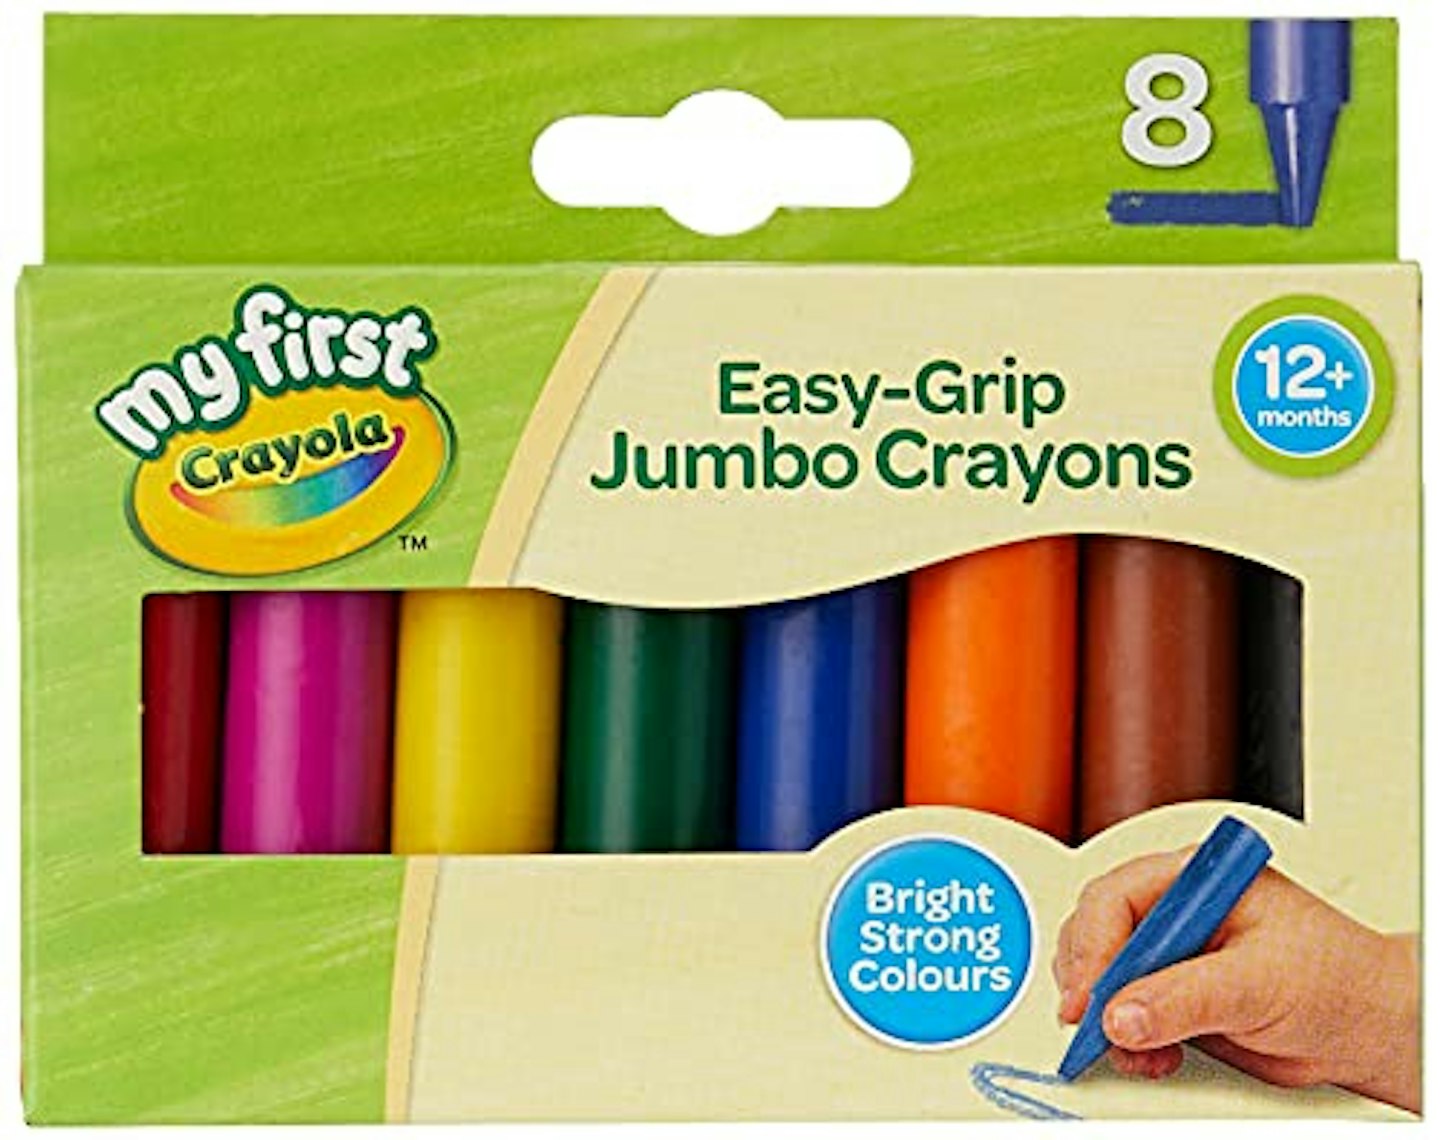  Crayola Ultra Clean Washable Crayons, Large Crayons for Toddlers,  16 Count, Gifts for Kids : Toys & Games